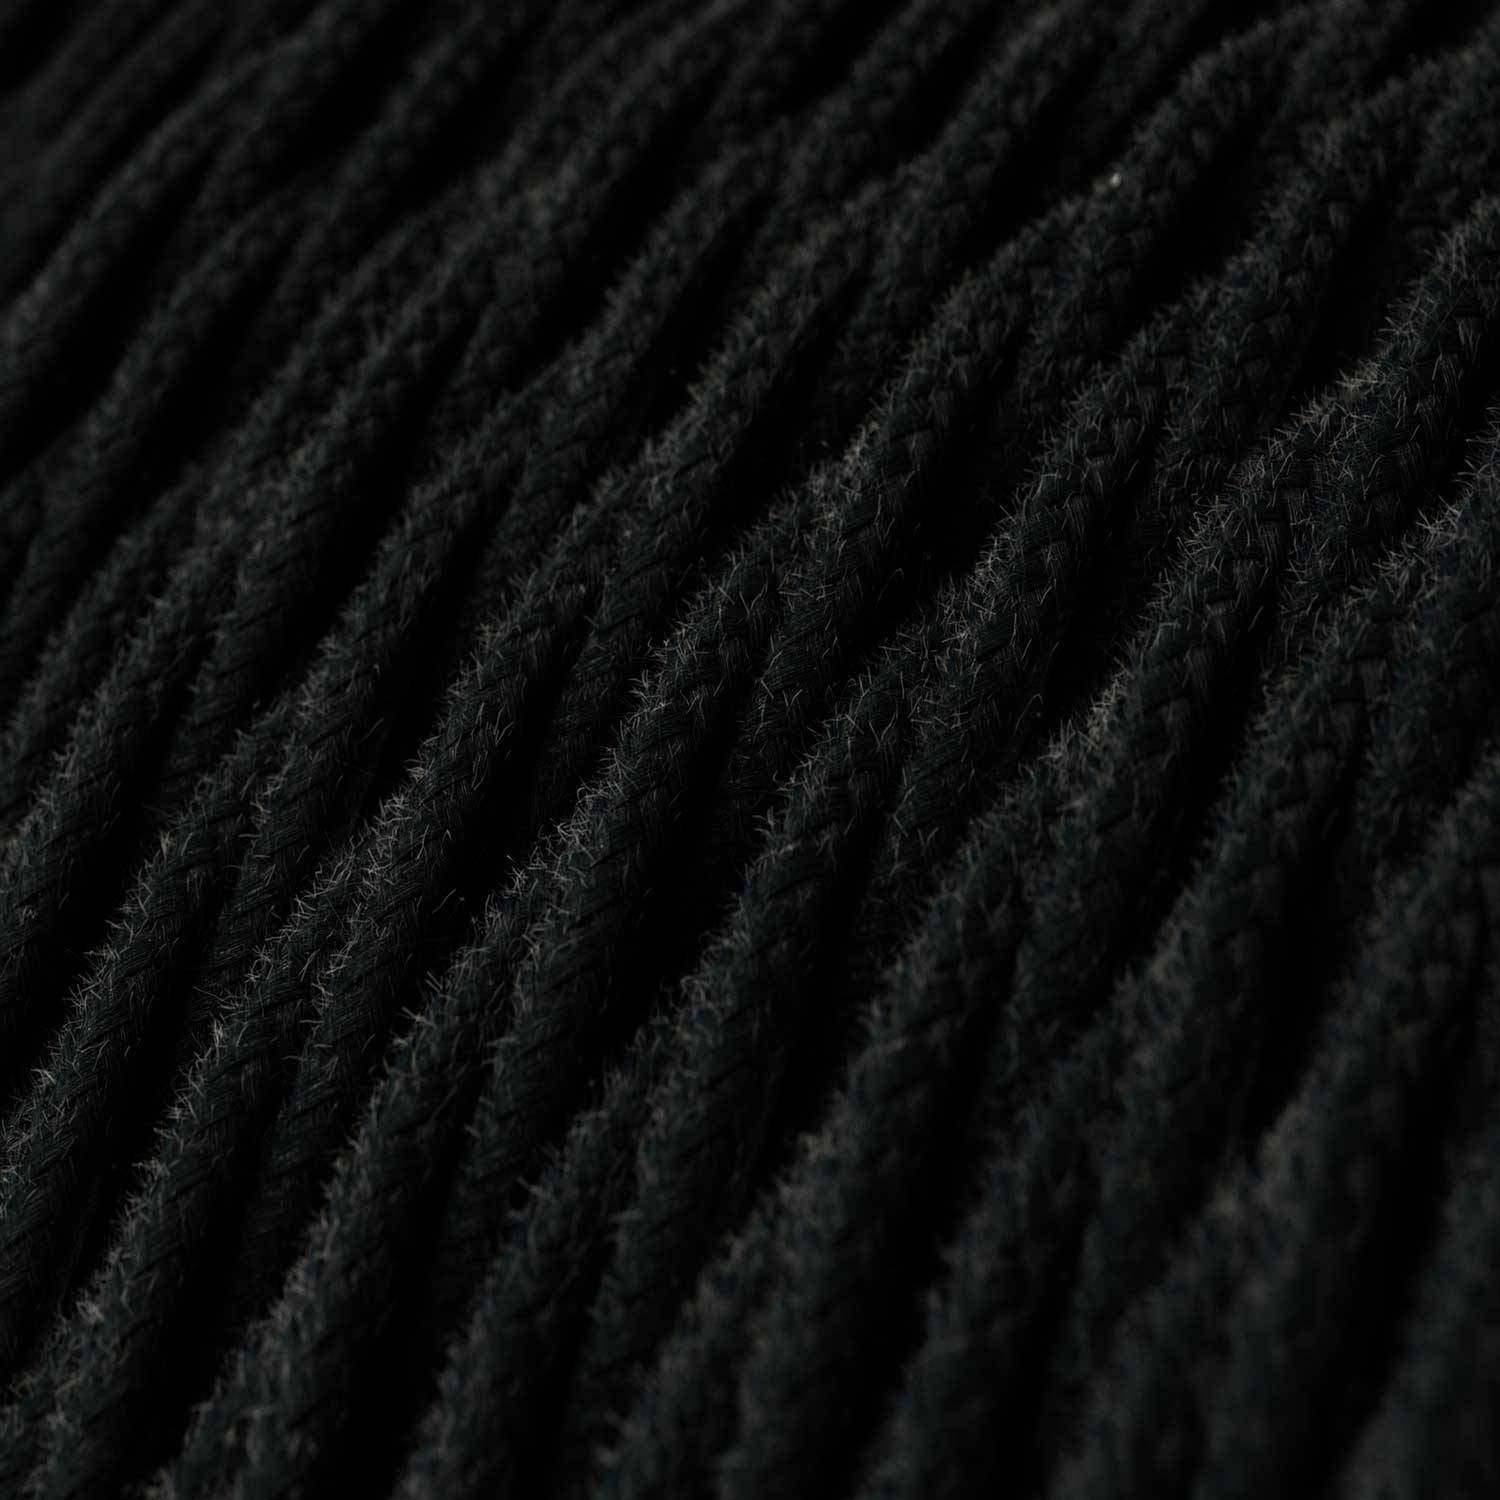 Cotton Charcoal Black Textile Cable - The Original Creative-Cables - TC04 braided 2x0.75mm / 3x0.75mm